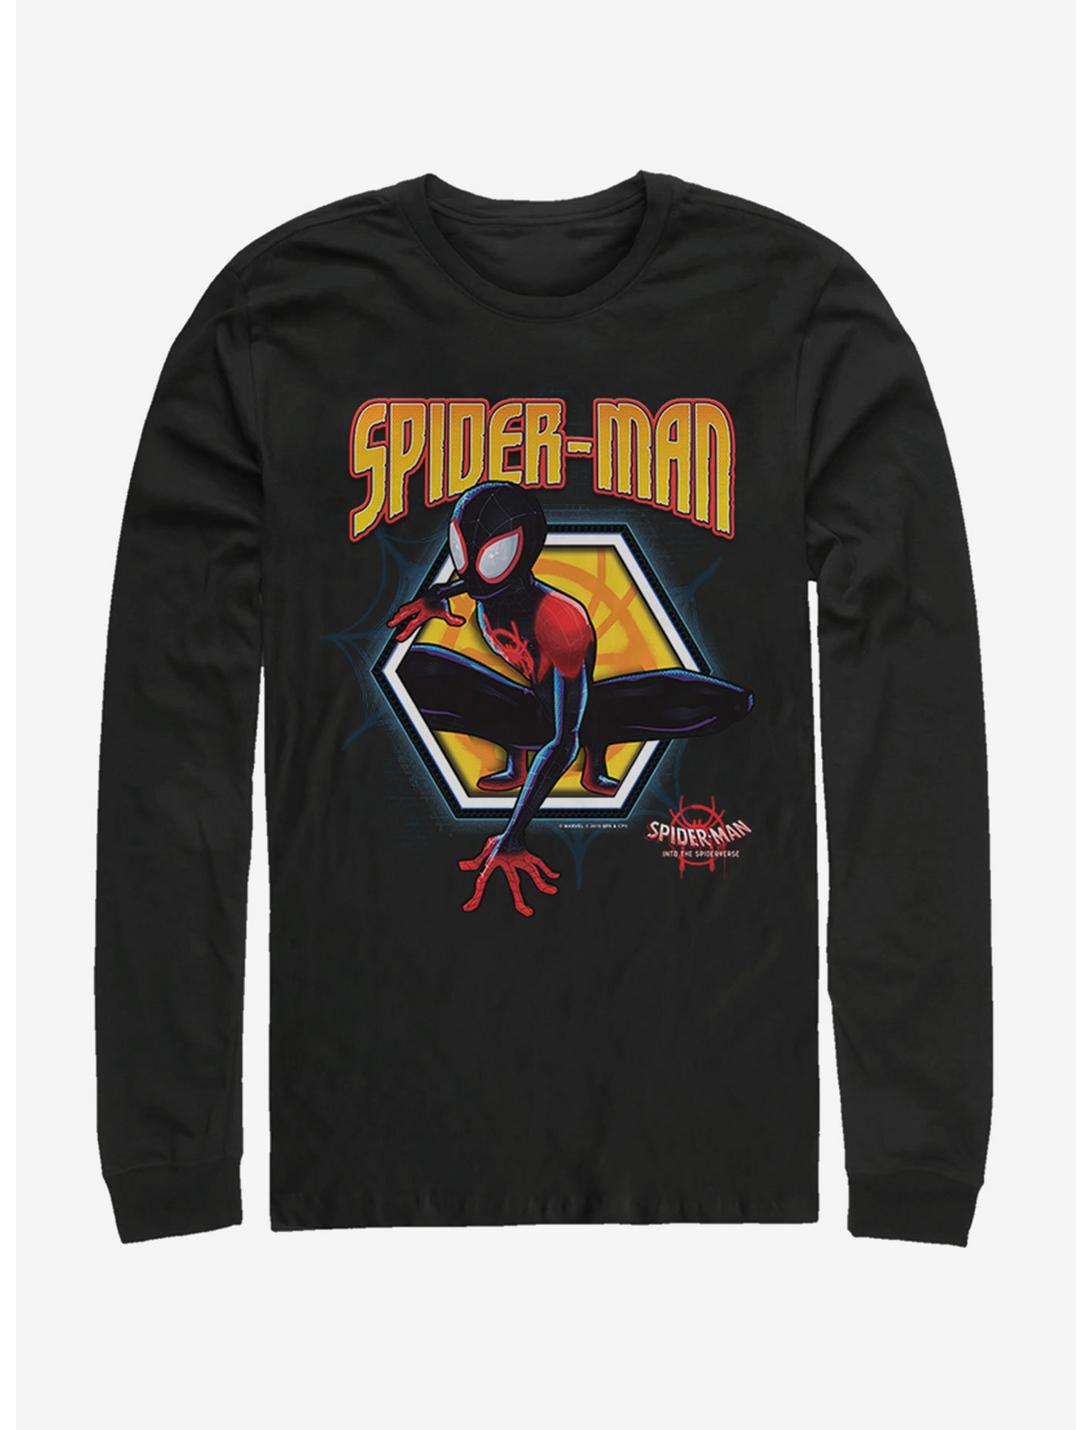 Marvel Spider-Man: Into the Spider-Verse Golden Miles Womens Long-Sleeve T-Shirt, BLACK, hi-res